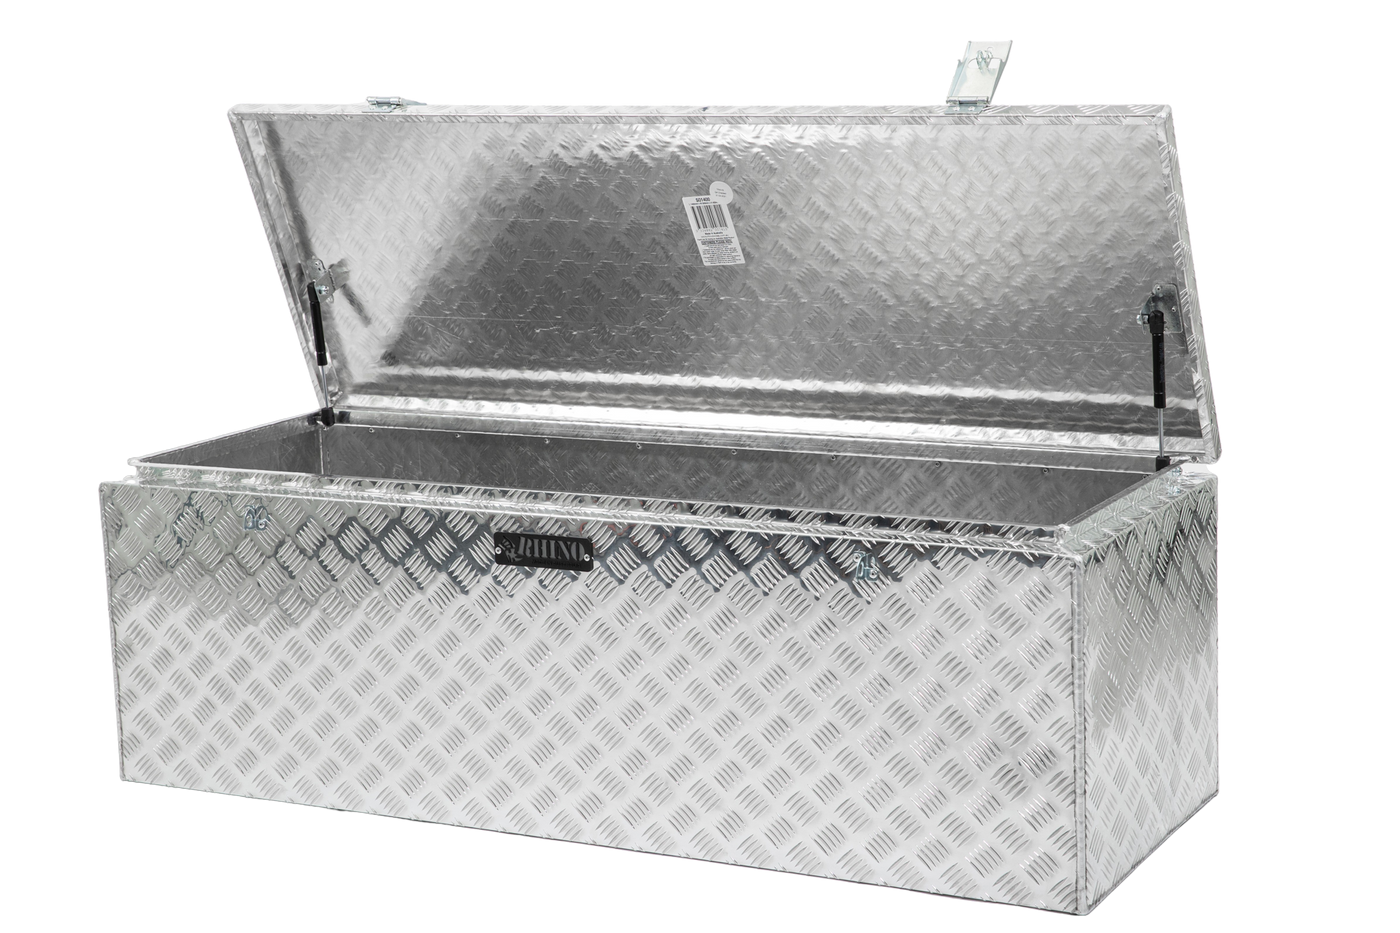 Single Opening Checker Plate Aluminium Tool Box with Secure Locking Lid Open